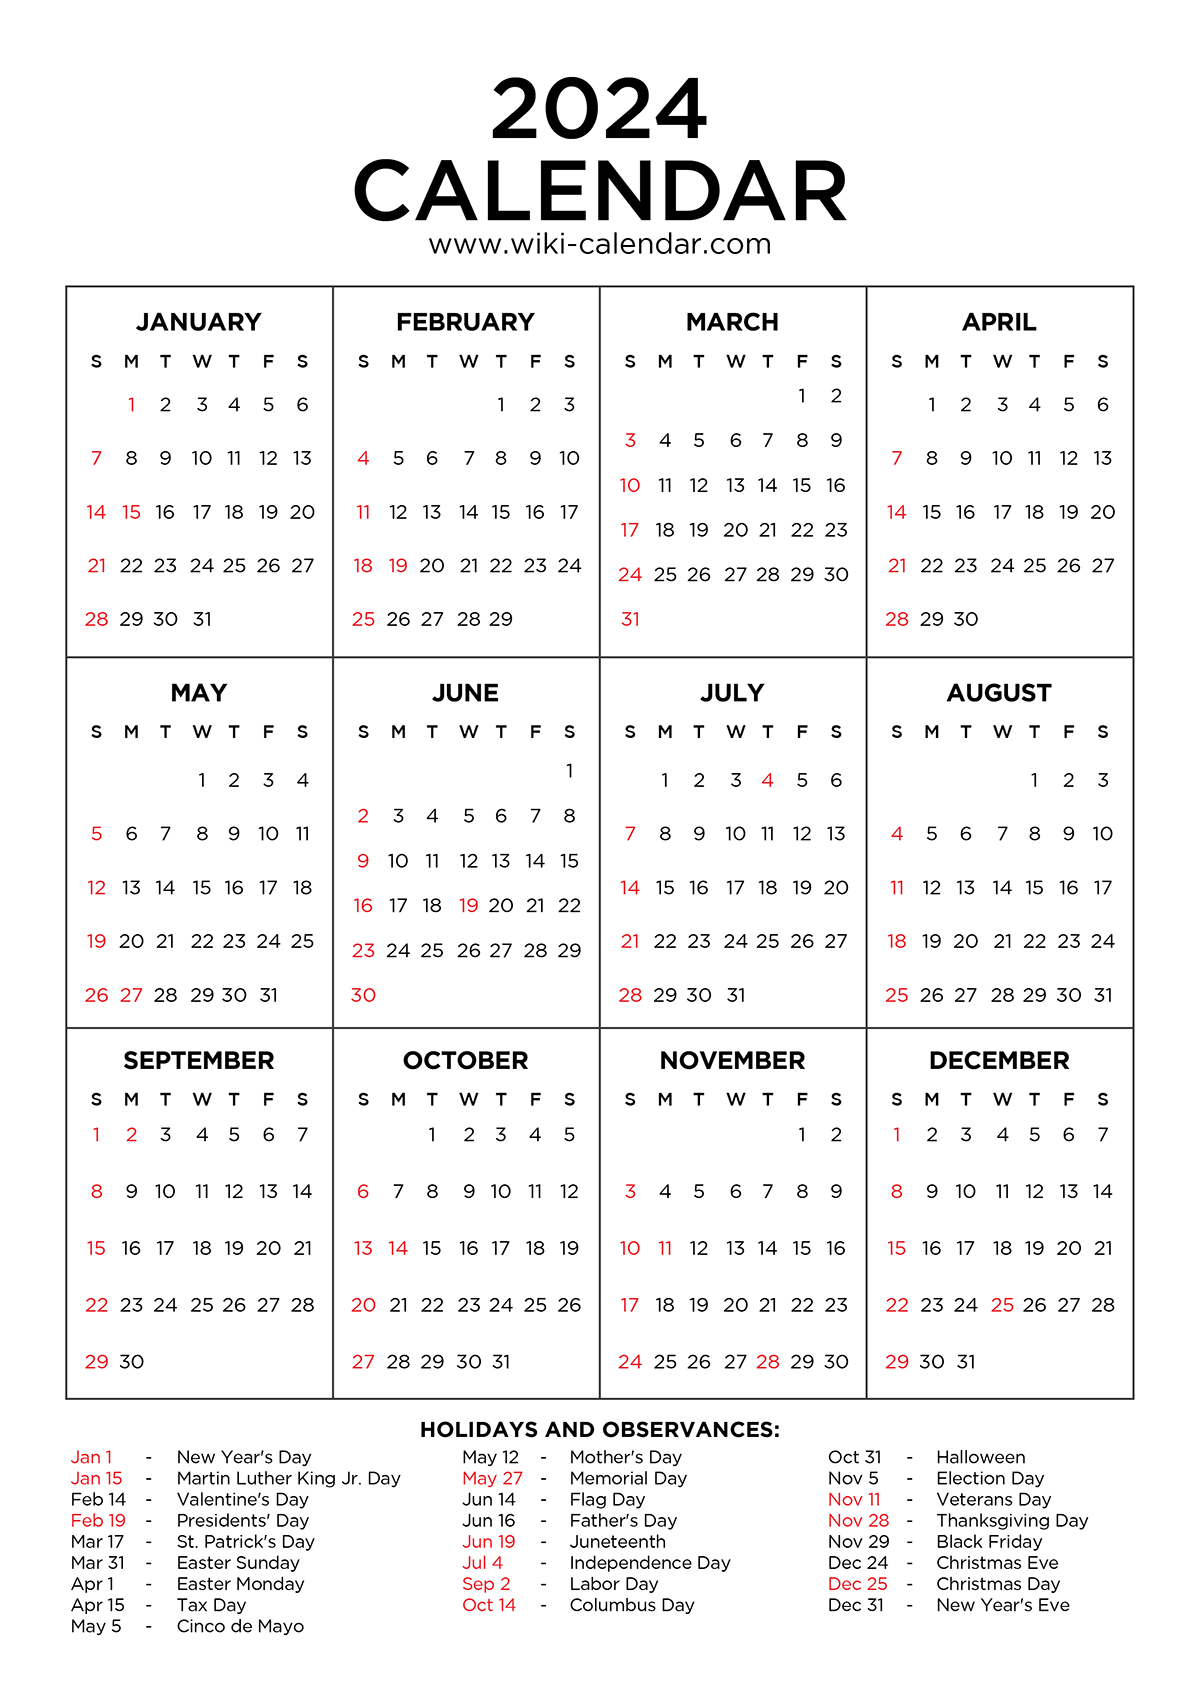 Year 2024 Calendar Printable With Holidays - Wiki Calendar intended for Free Printable Blank Year Calendar Template 2024